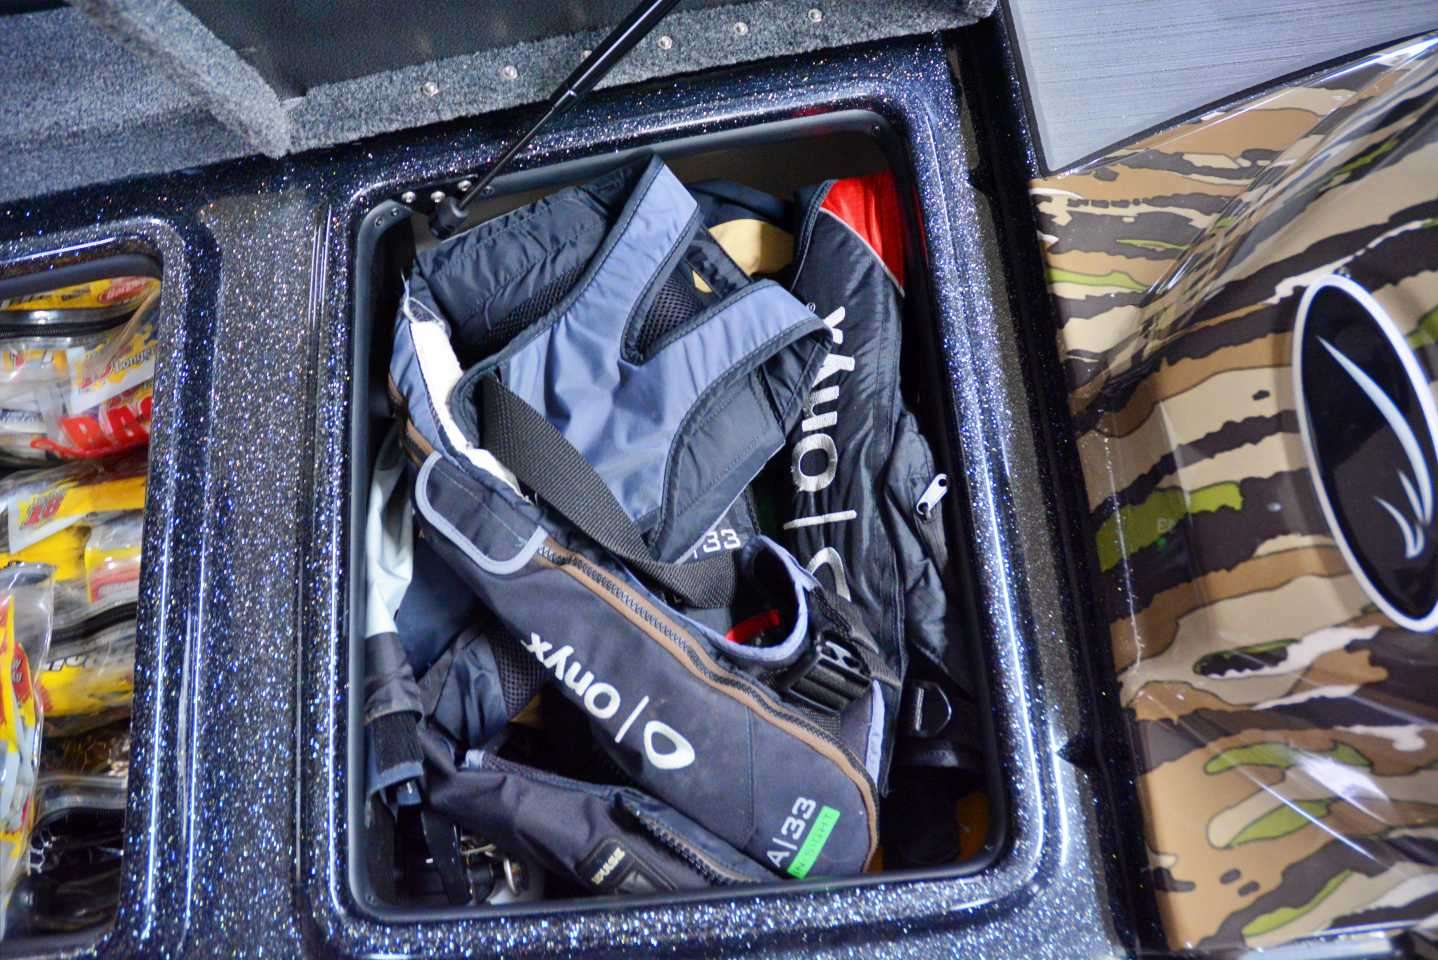 Forward of the console and between the soft plastic box is quick access to PFDs and outerwear like raingear.  